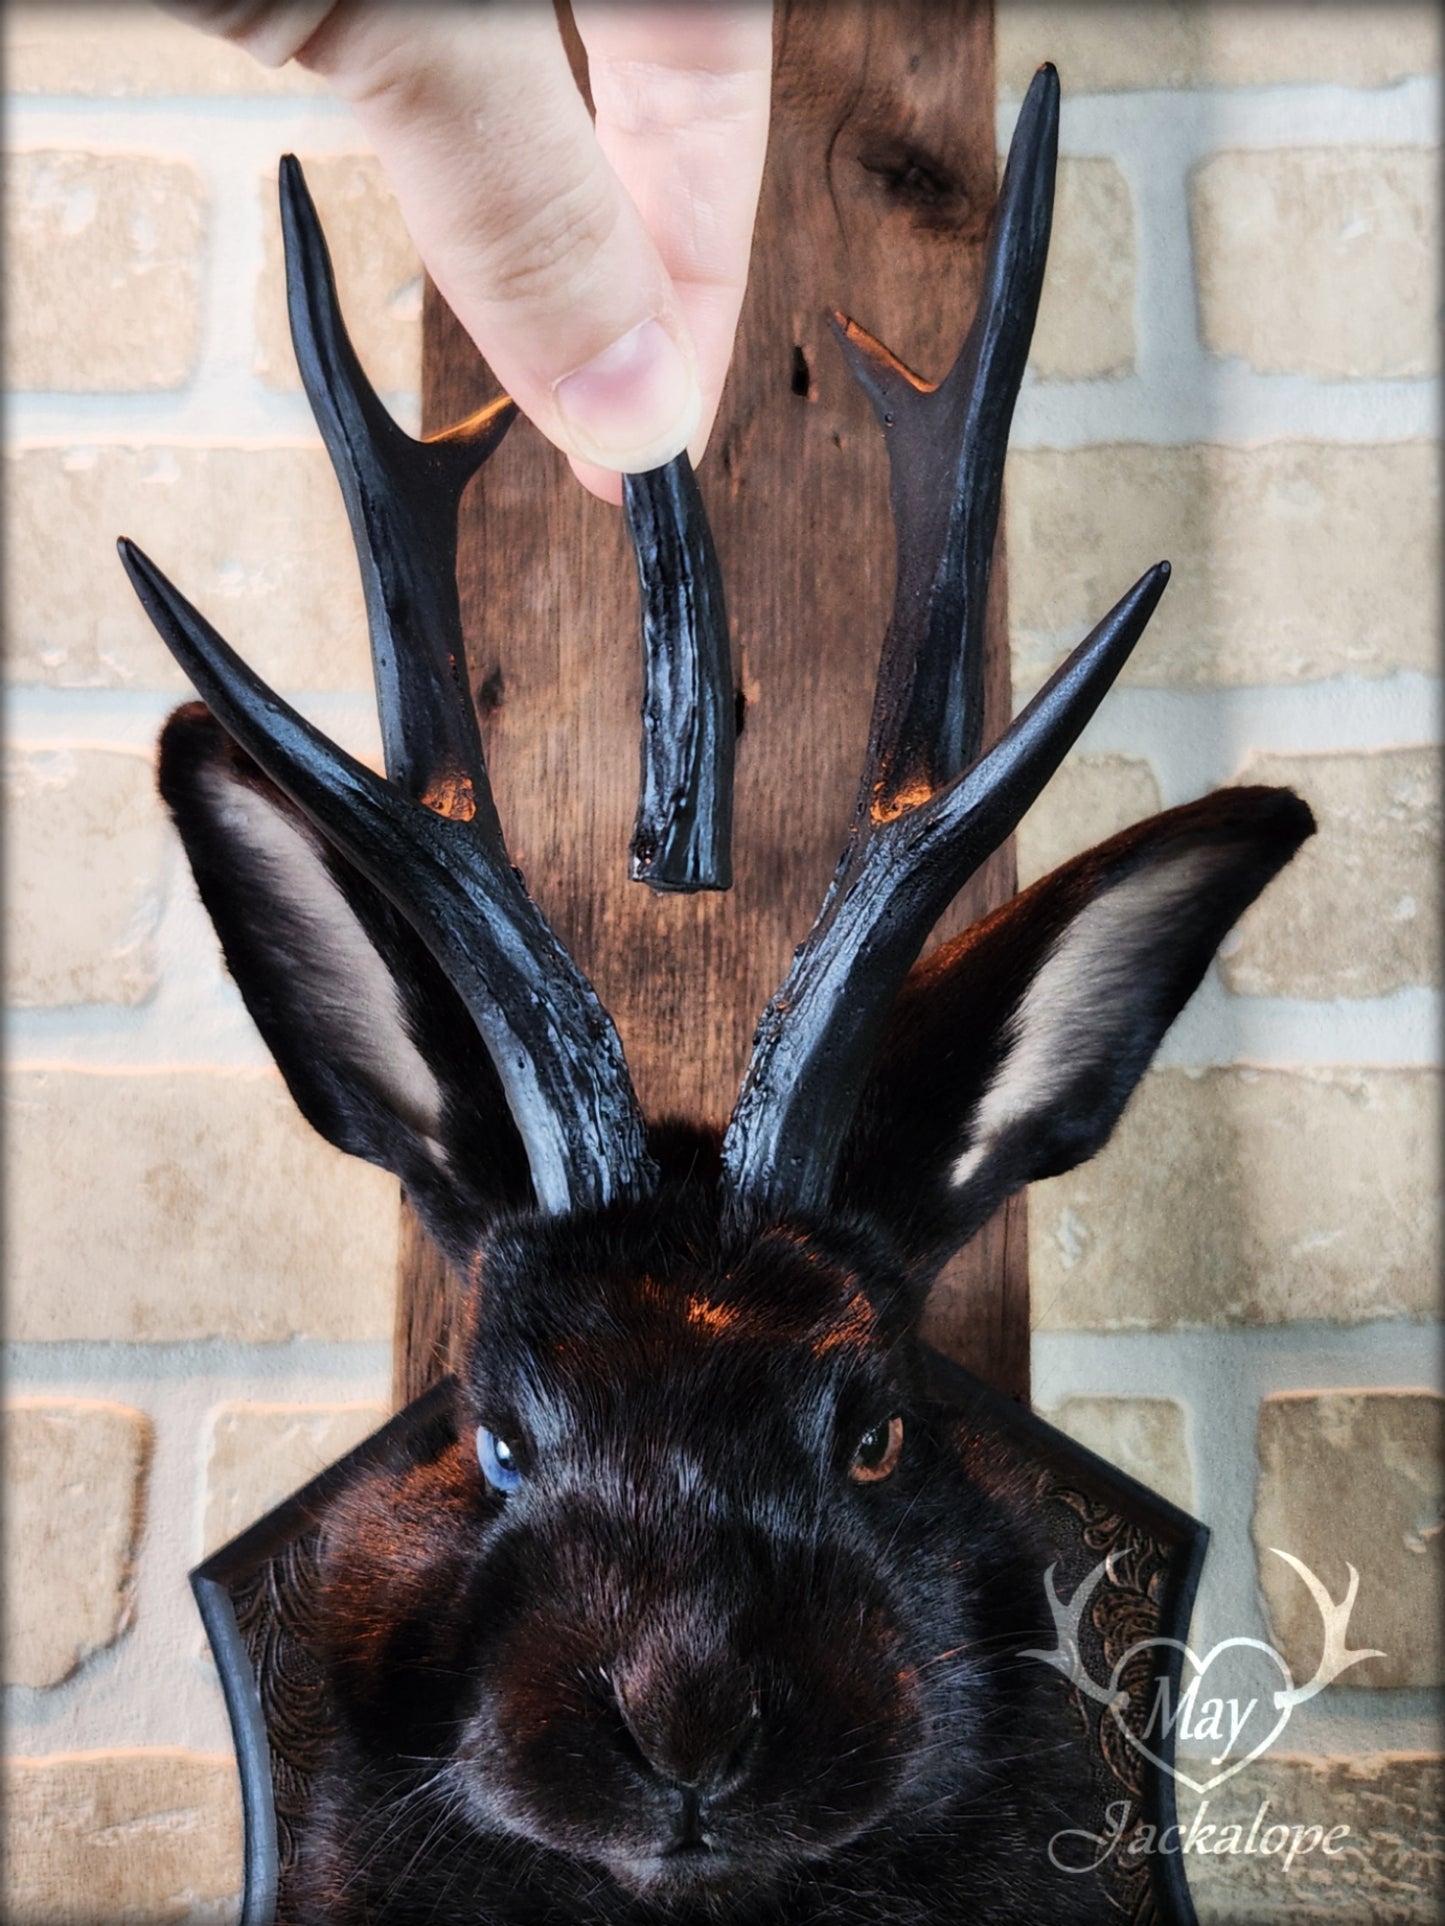 Black Jackalope taxidermy with black antlers replica, heterochromia eyes on a decorated plaque